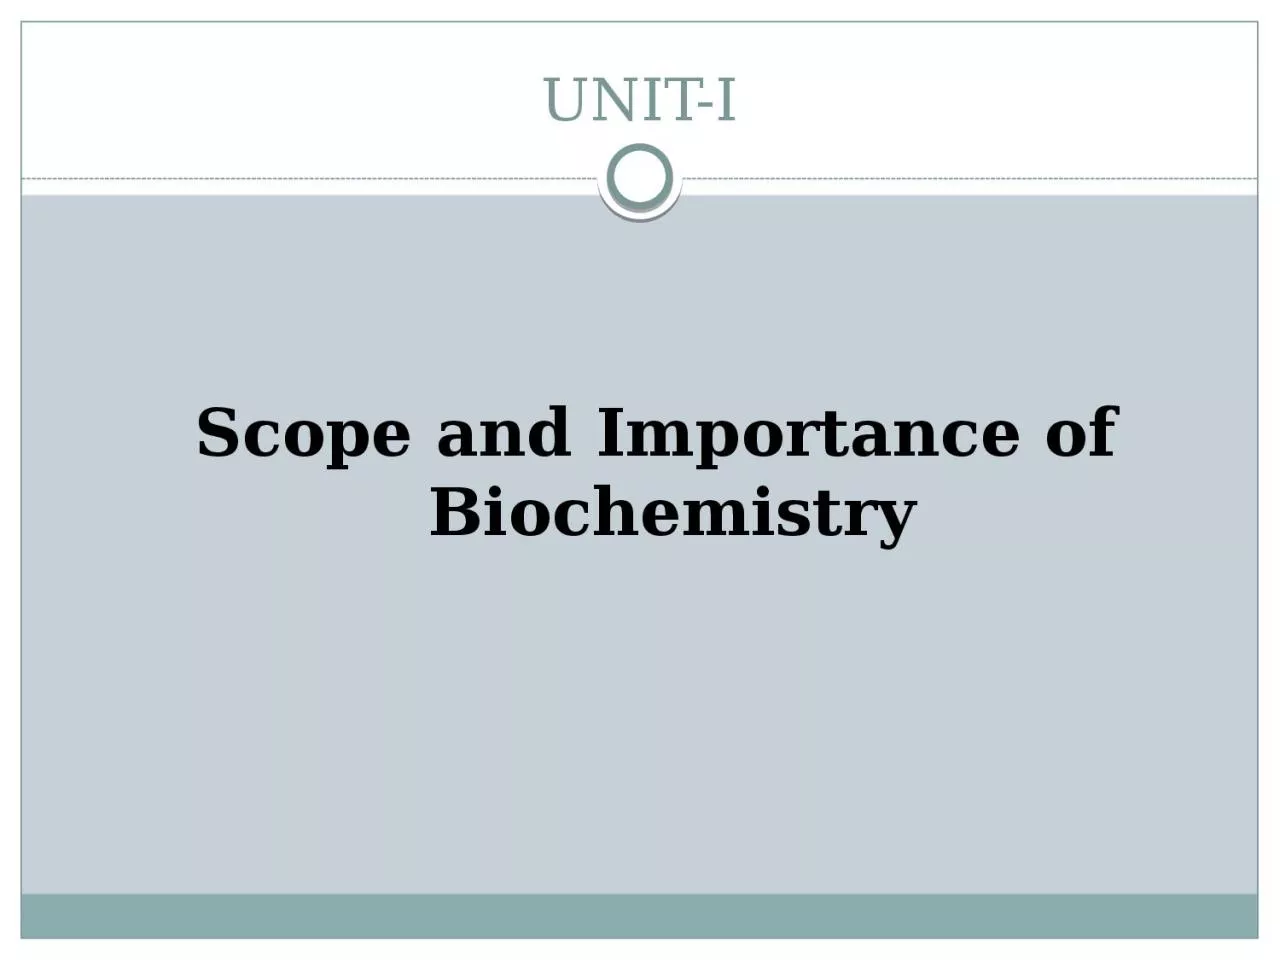 Scope and Importance of Biochemistry